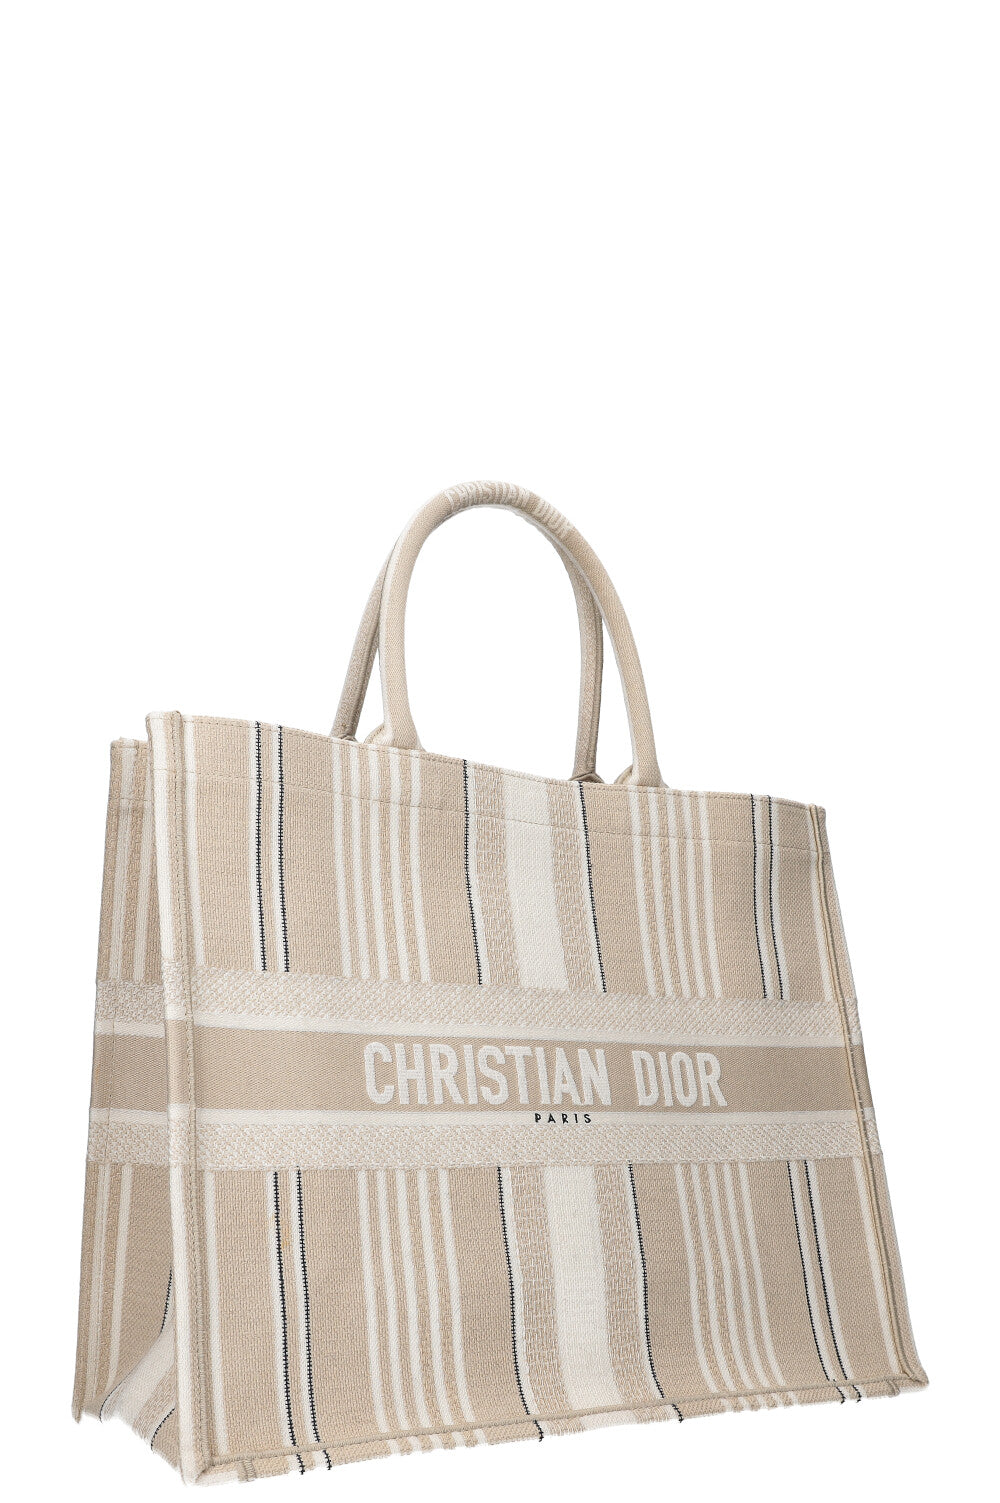 CHRISTIAN DIOR Book Tote Striped Ivory